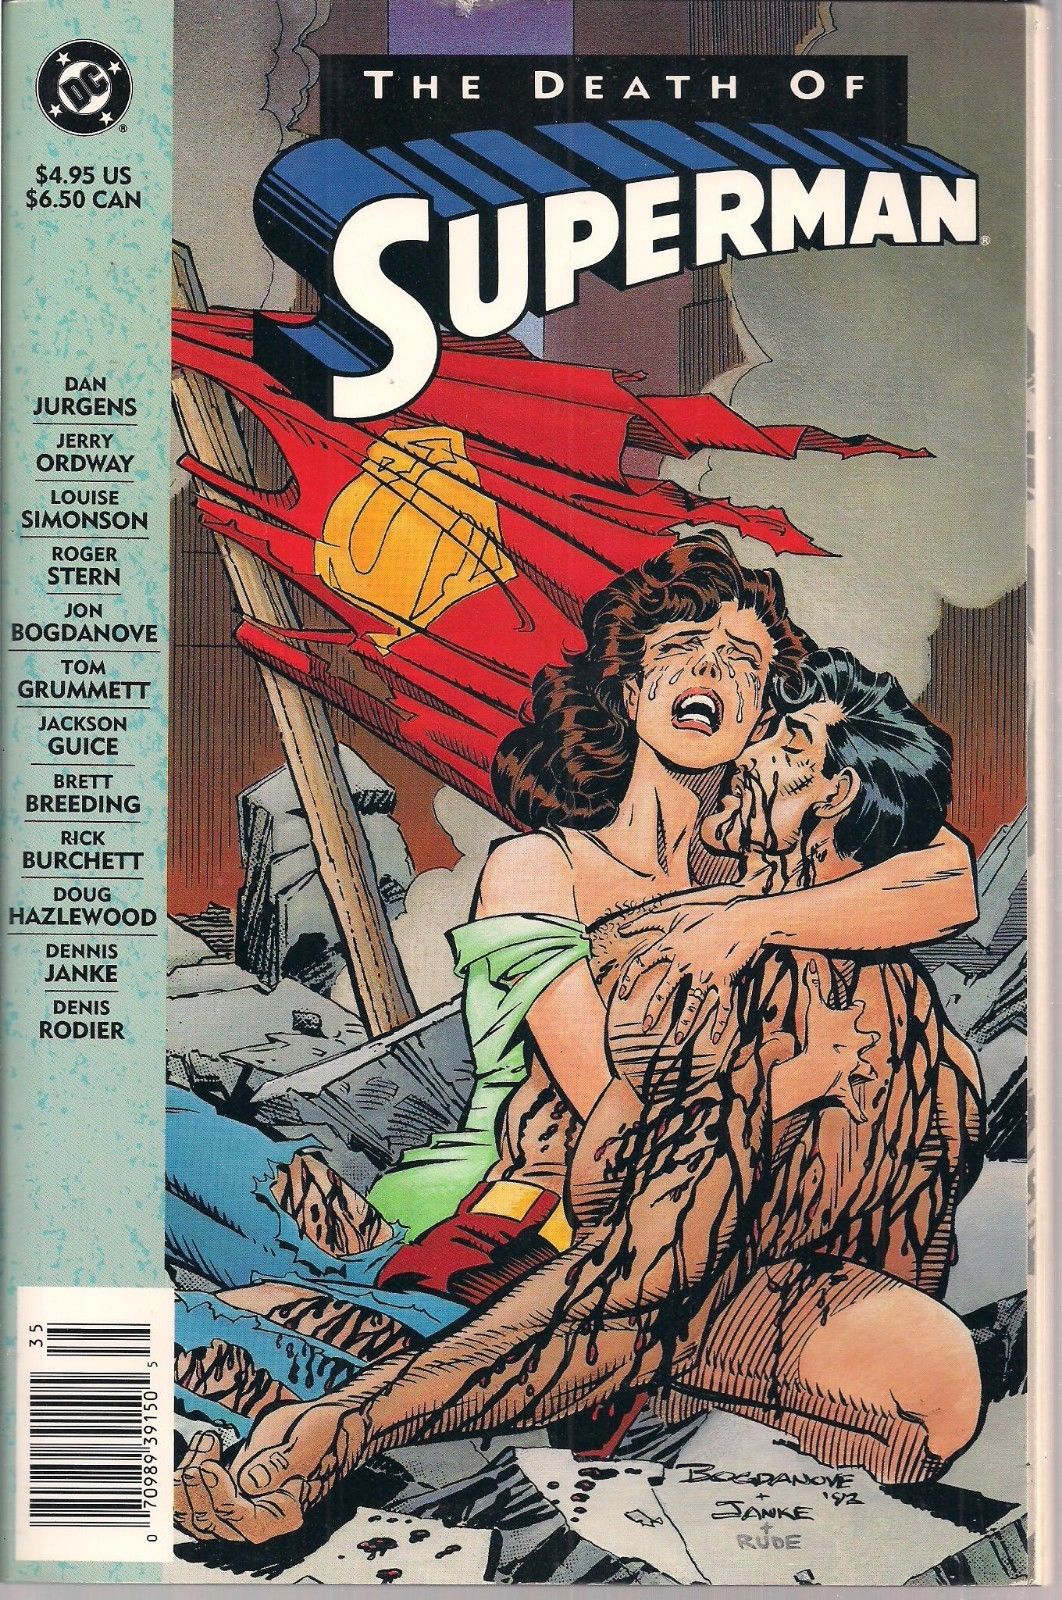 The-Death-Of-Superman-Trade-Paperback-Edition-2nd-Print-With-UPC.jpg